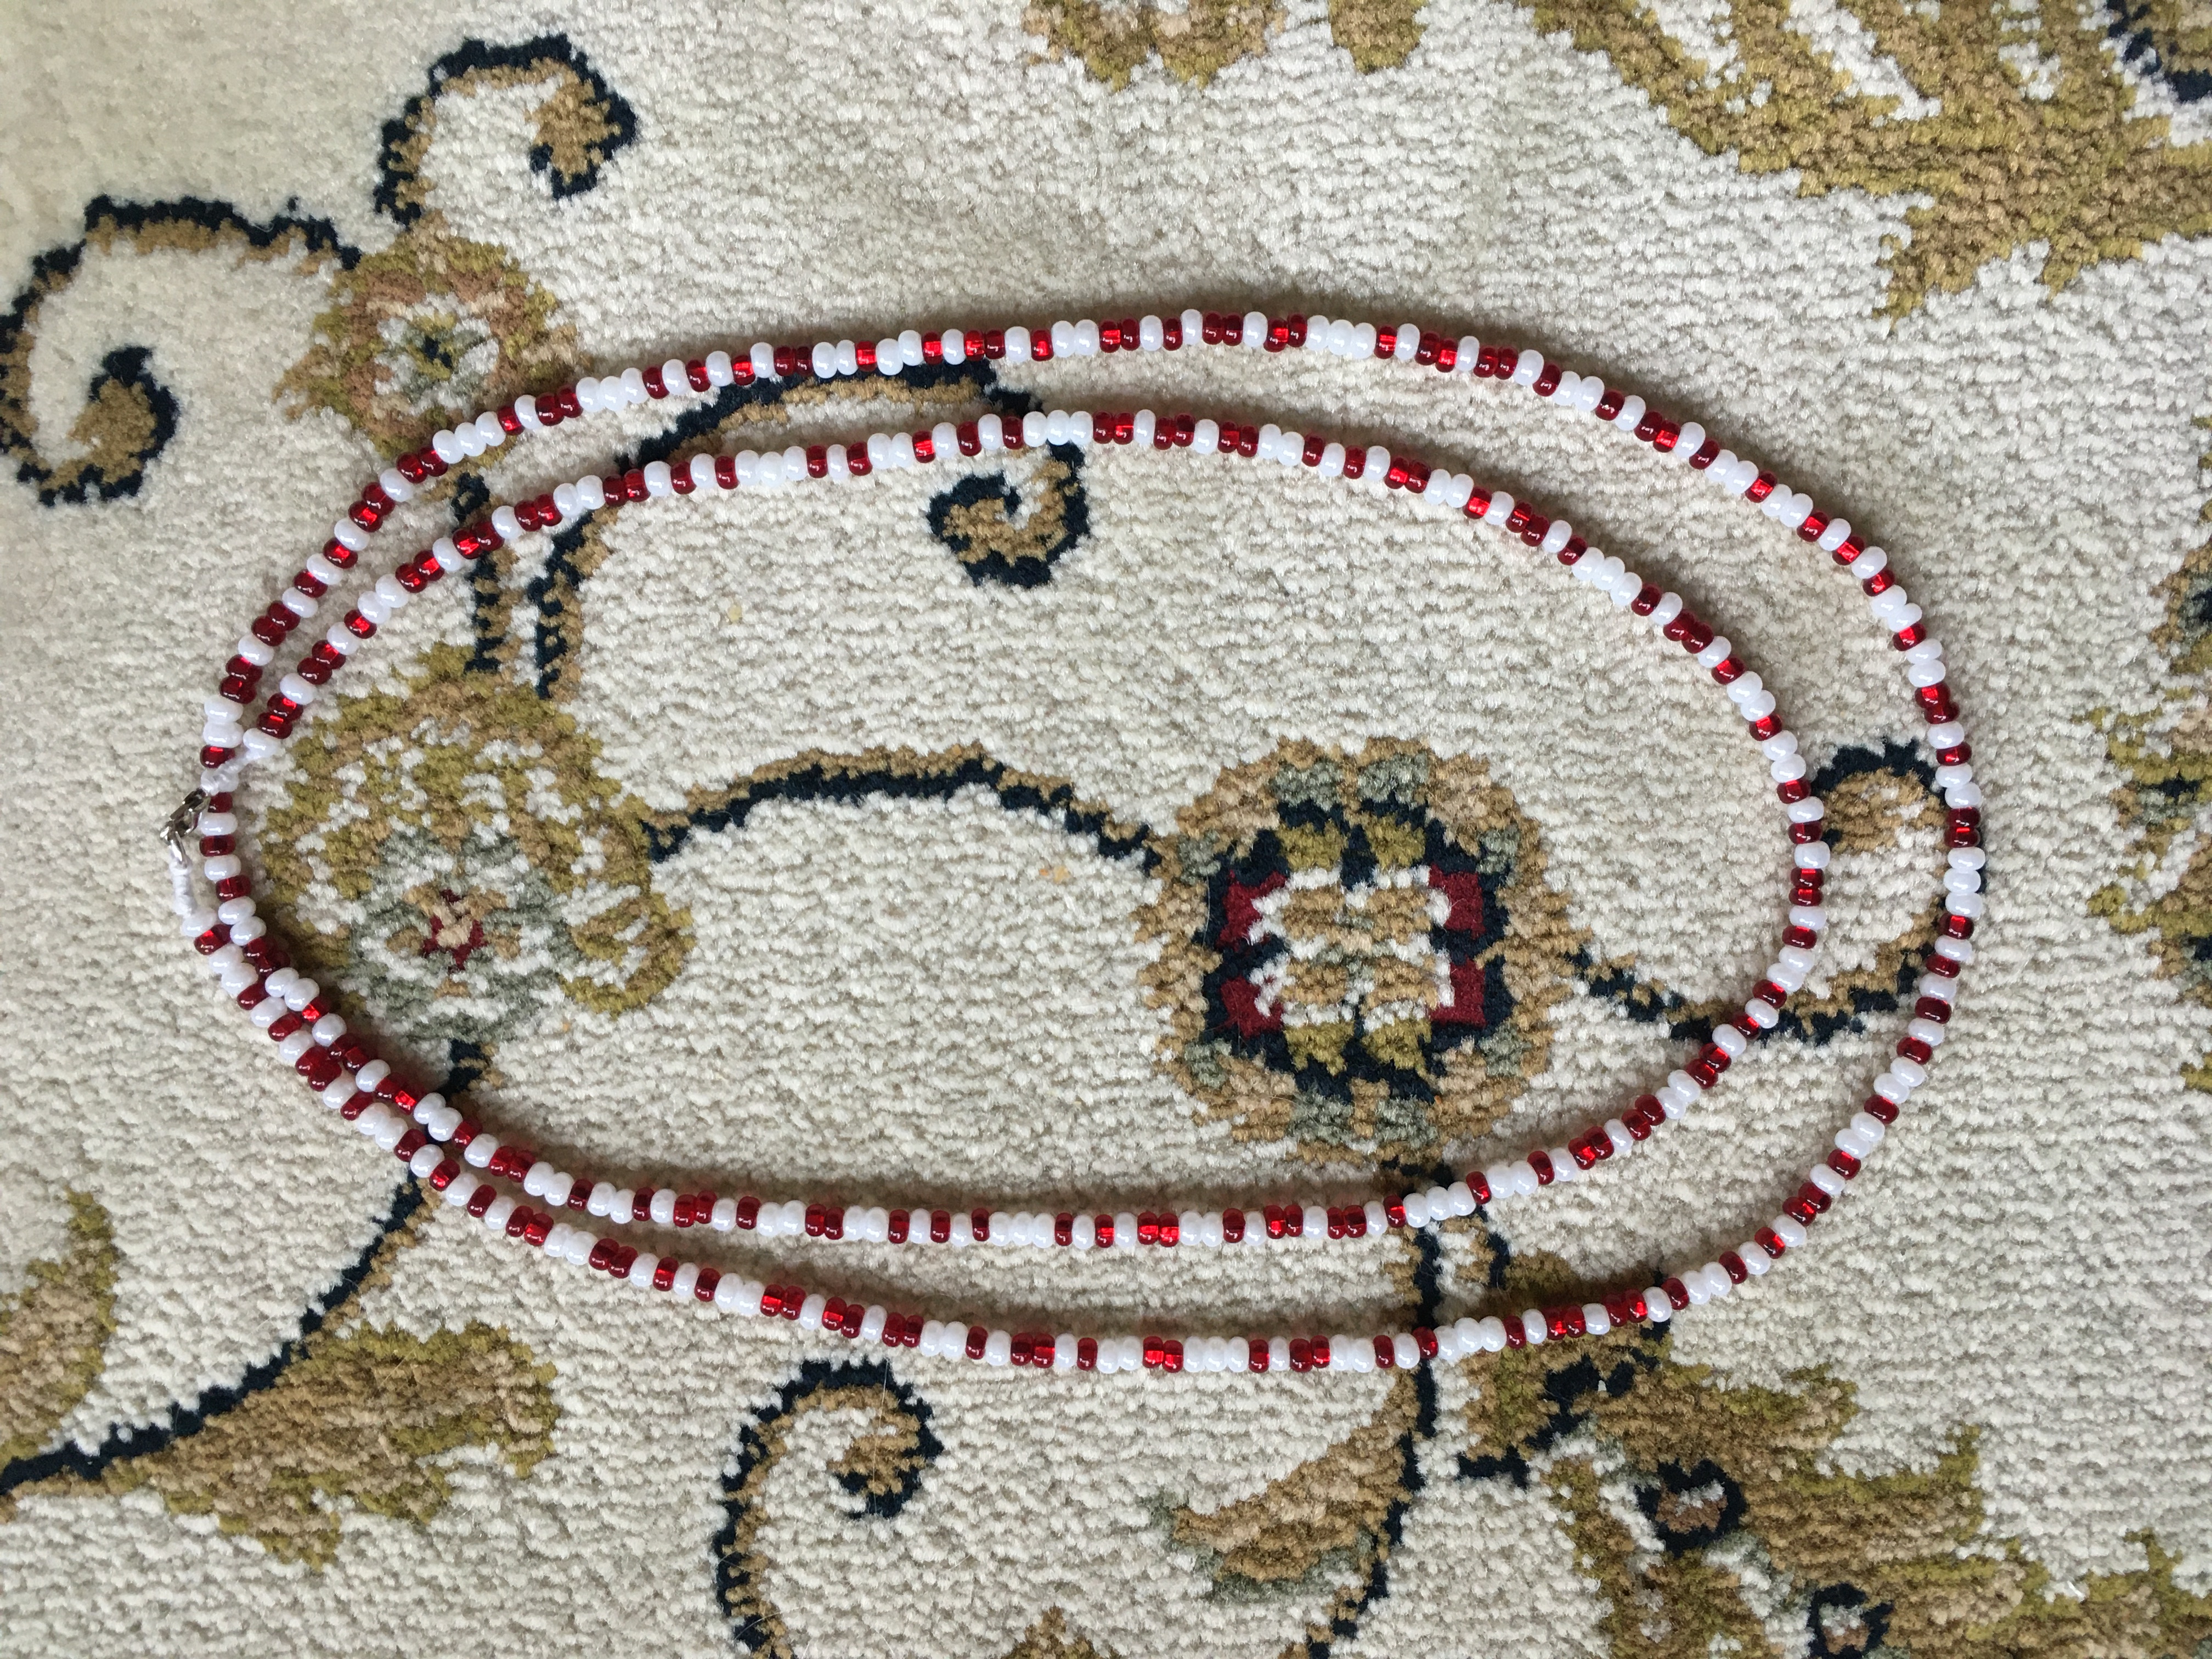 Long necklace with red and white beads